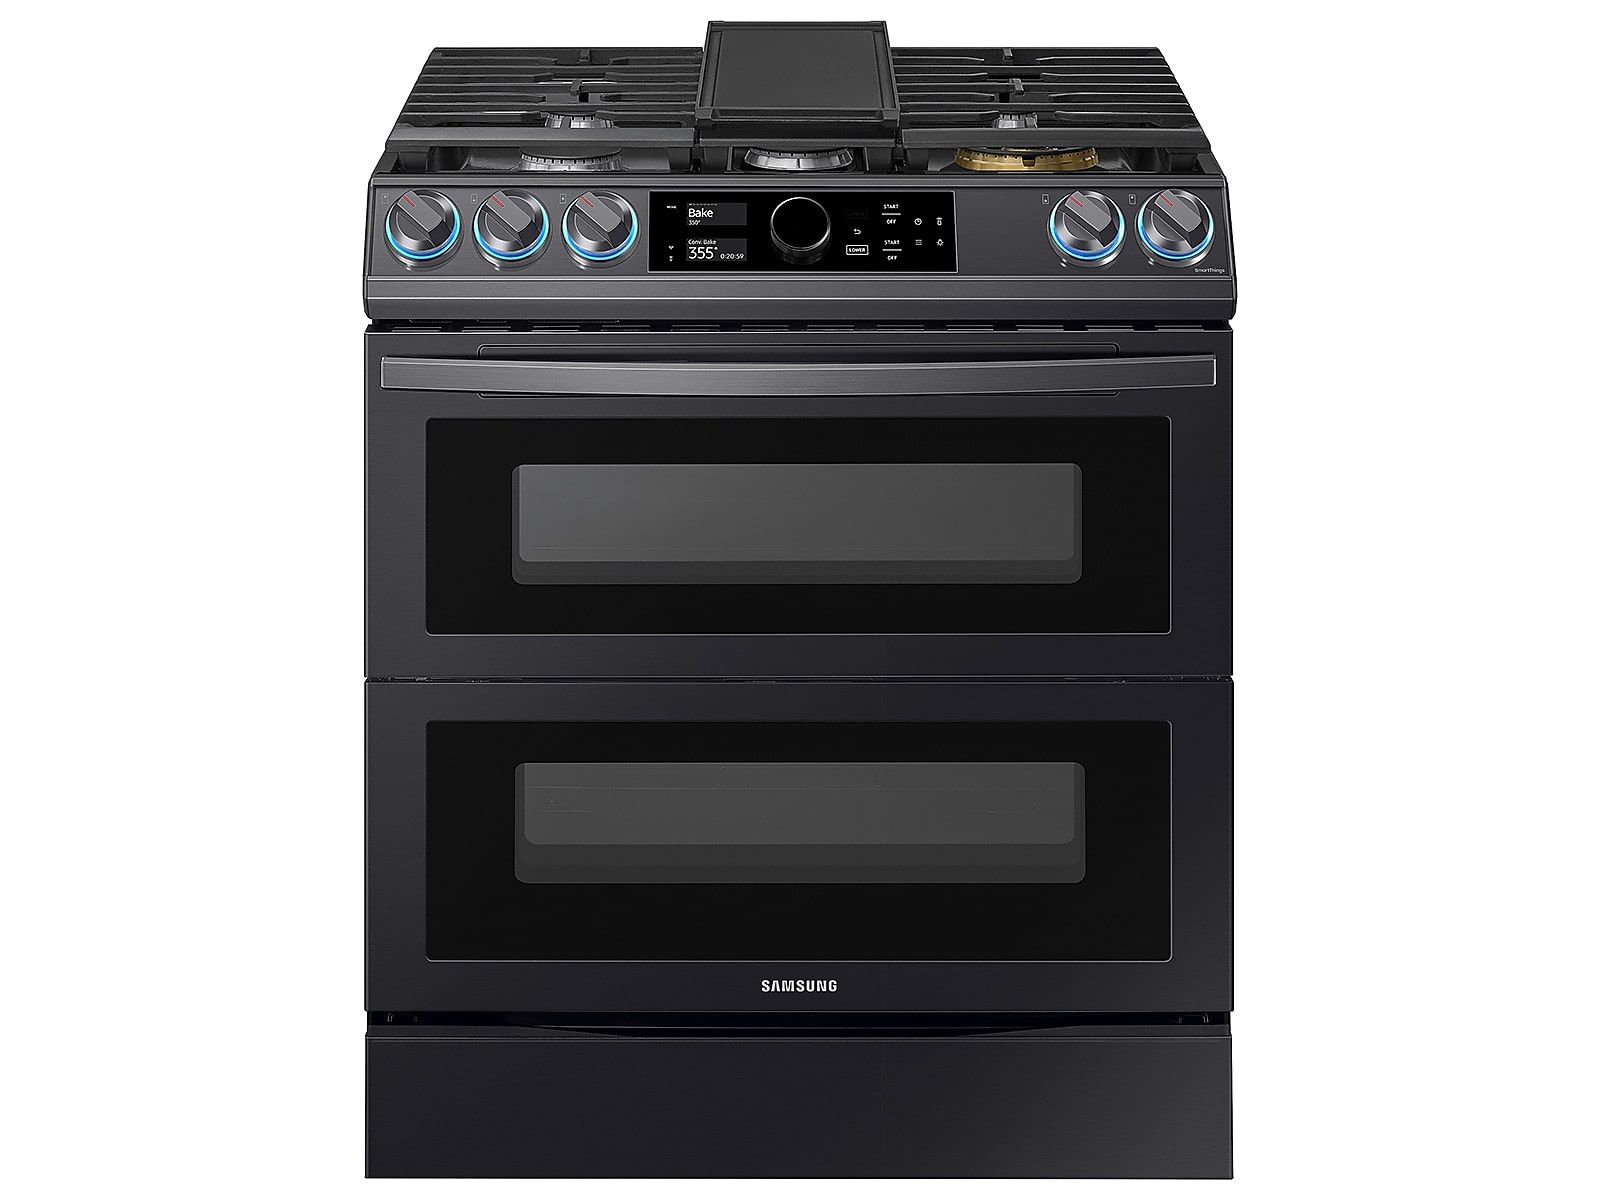 Samsung 6.3 cu. ft. Flex Duo™ Front Control Slide-in Dual Fuel Range with Smart Dial, Air Fry, and Wi-Fi in Black Stainless Steel(NY63T8751SG/AA)